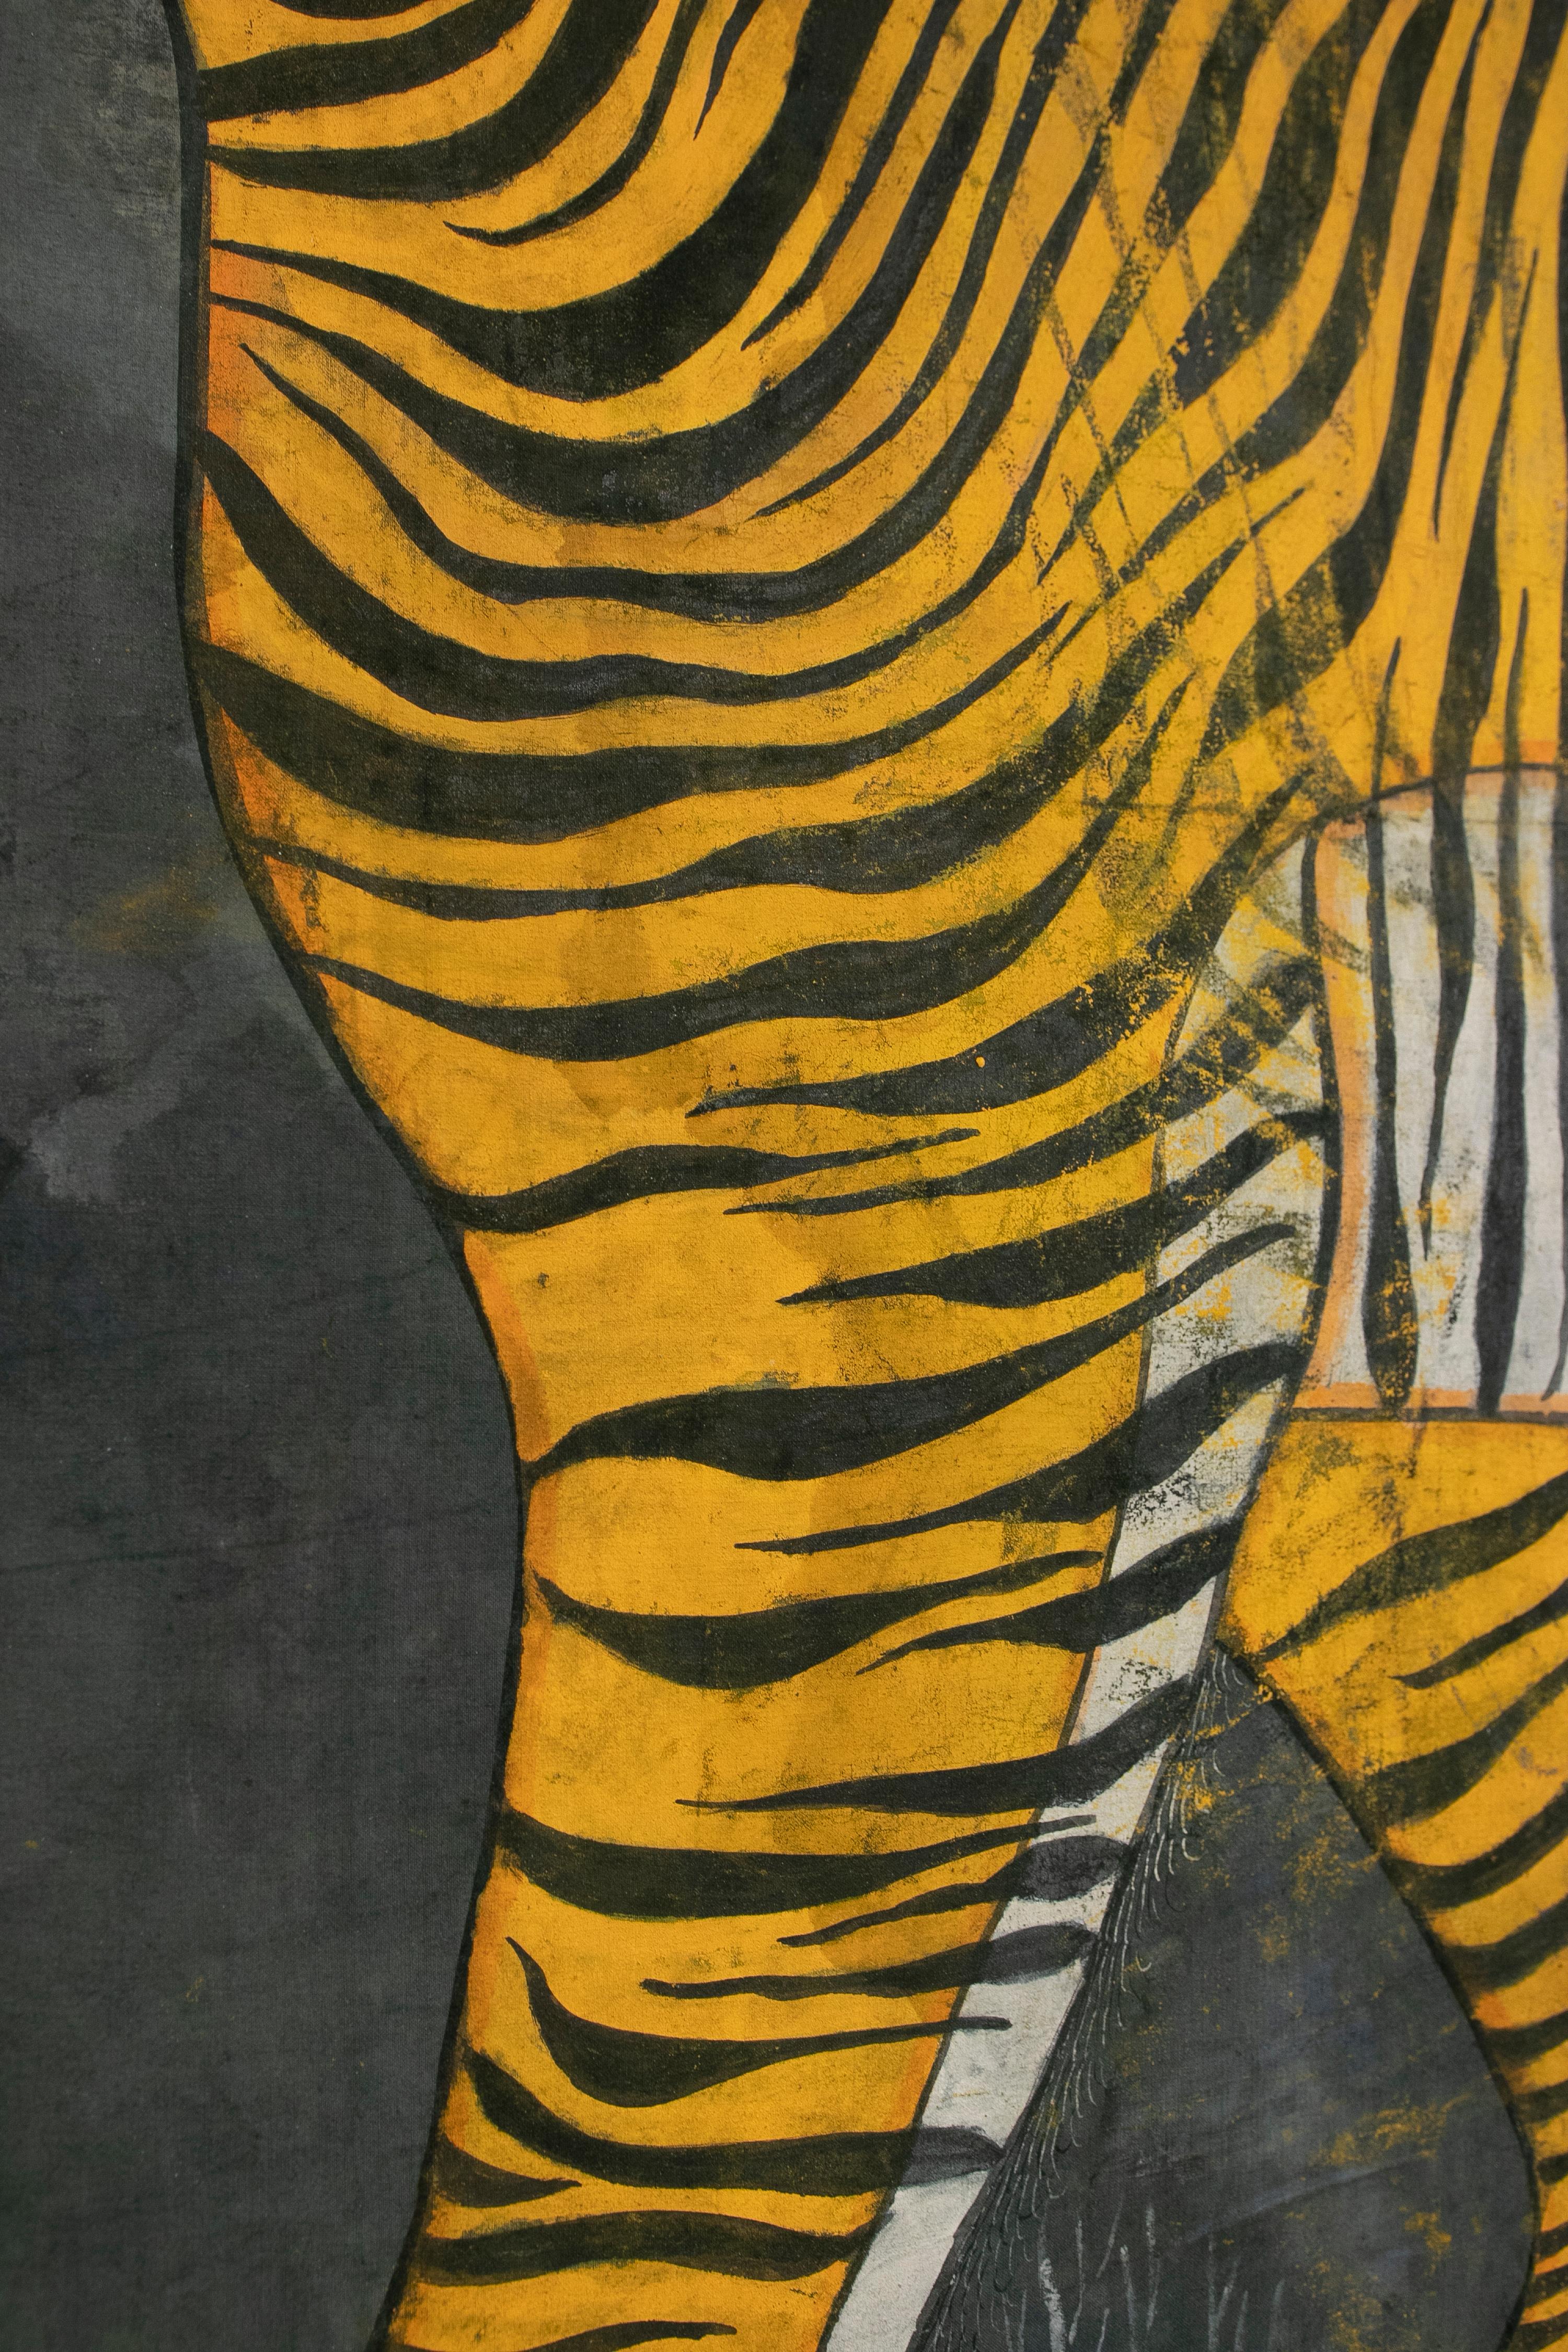 Indian 1970s Bengal Tiger Painting in Jaime Parlade Style